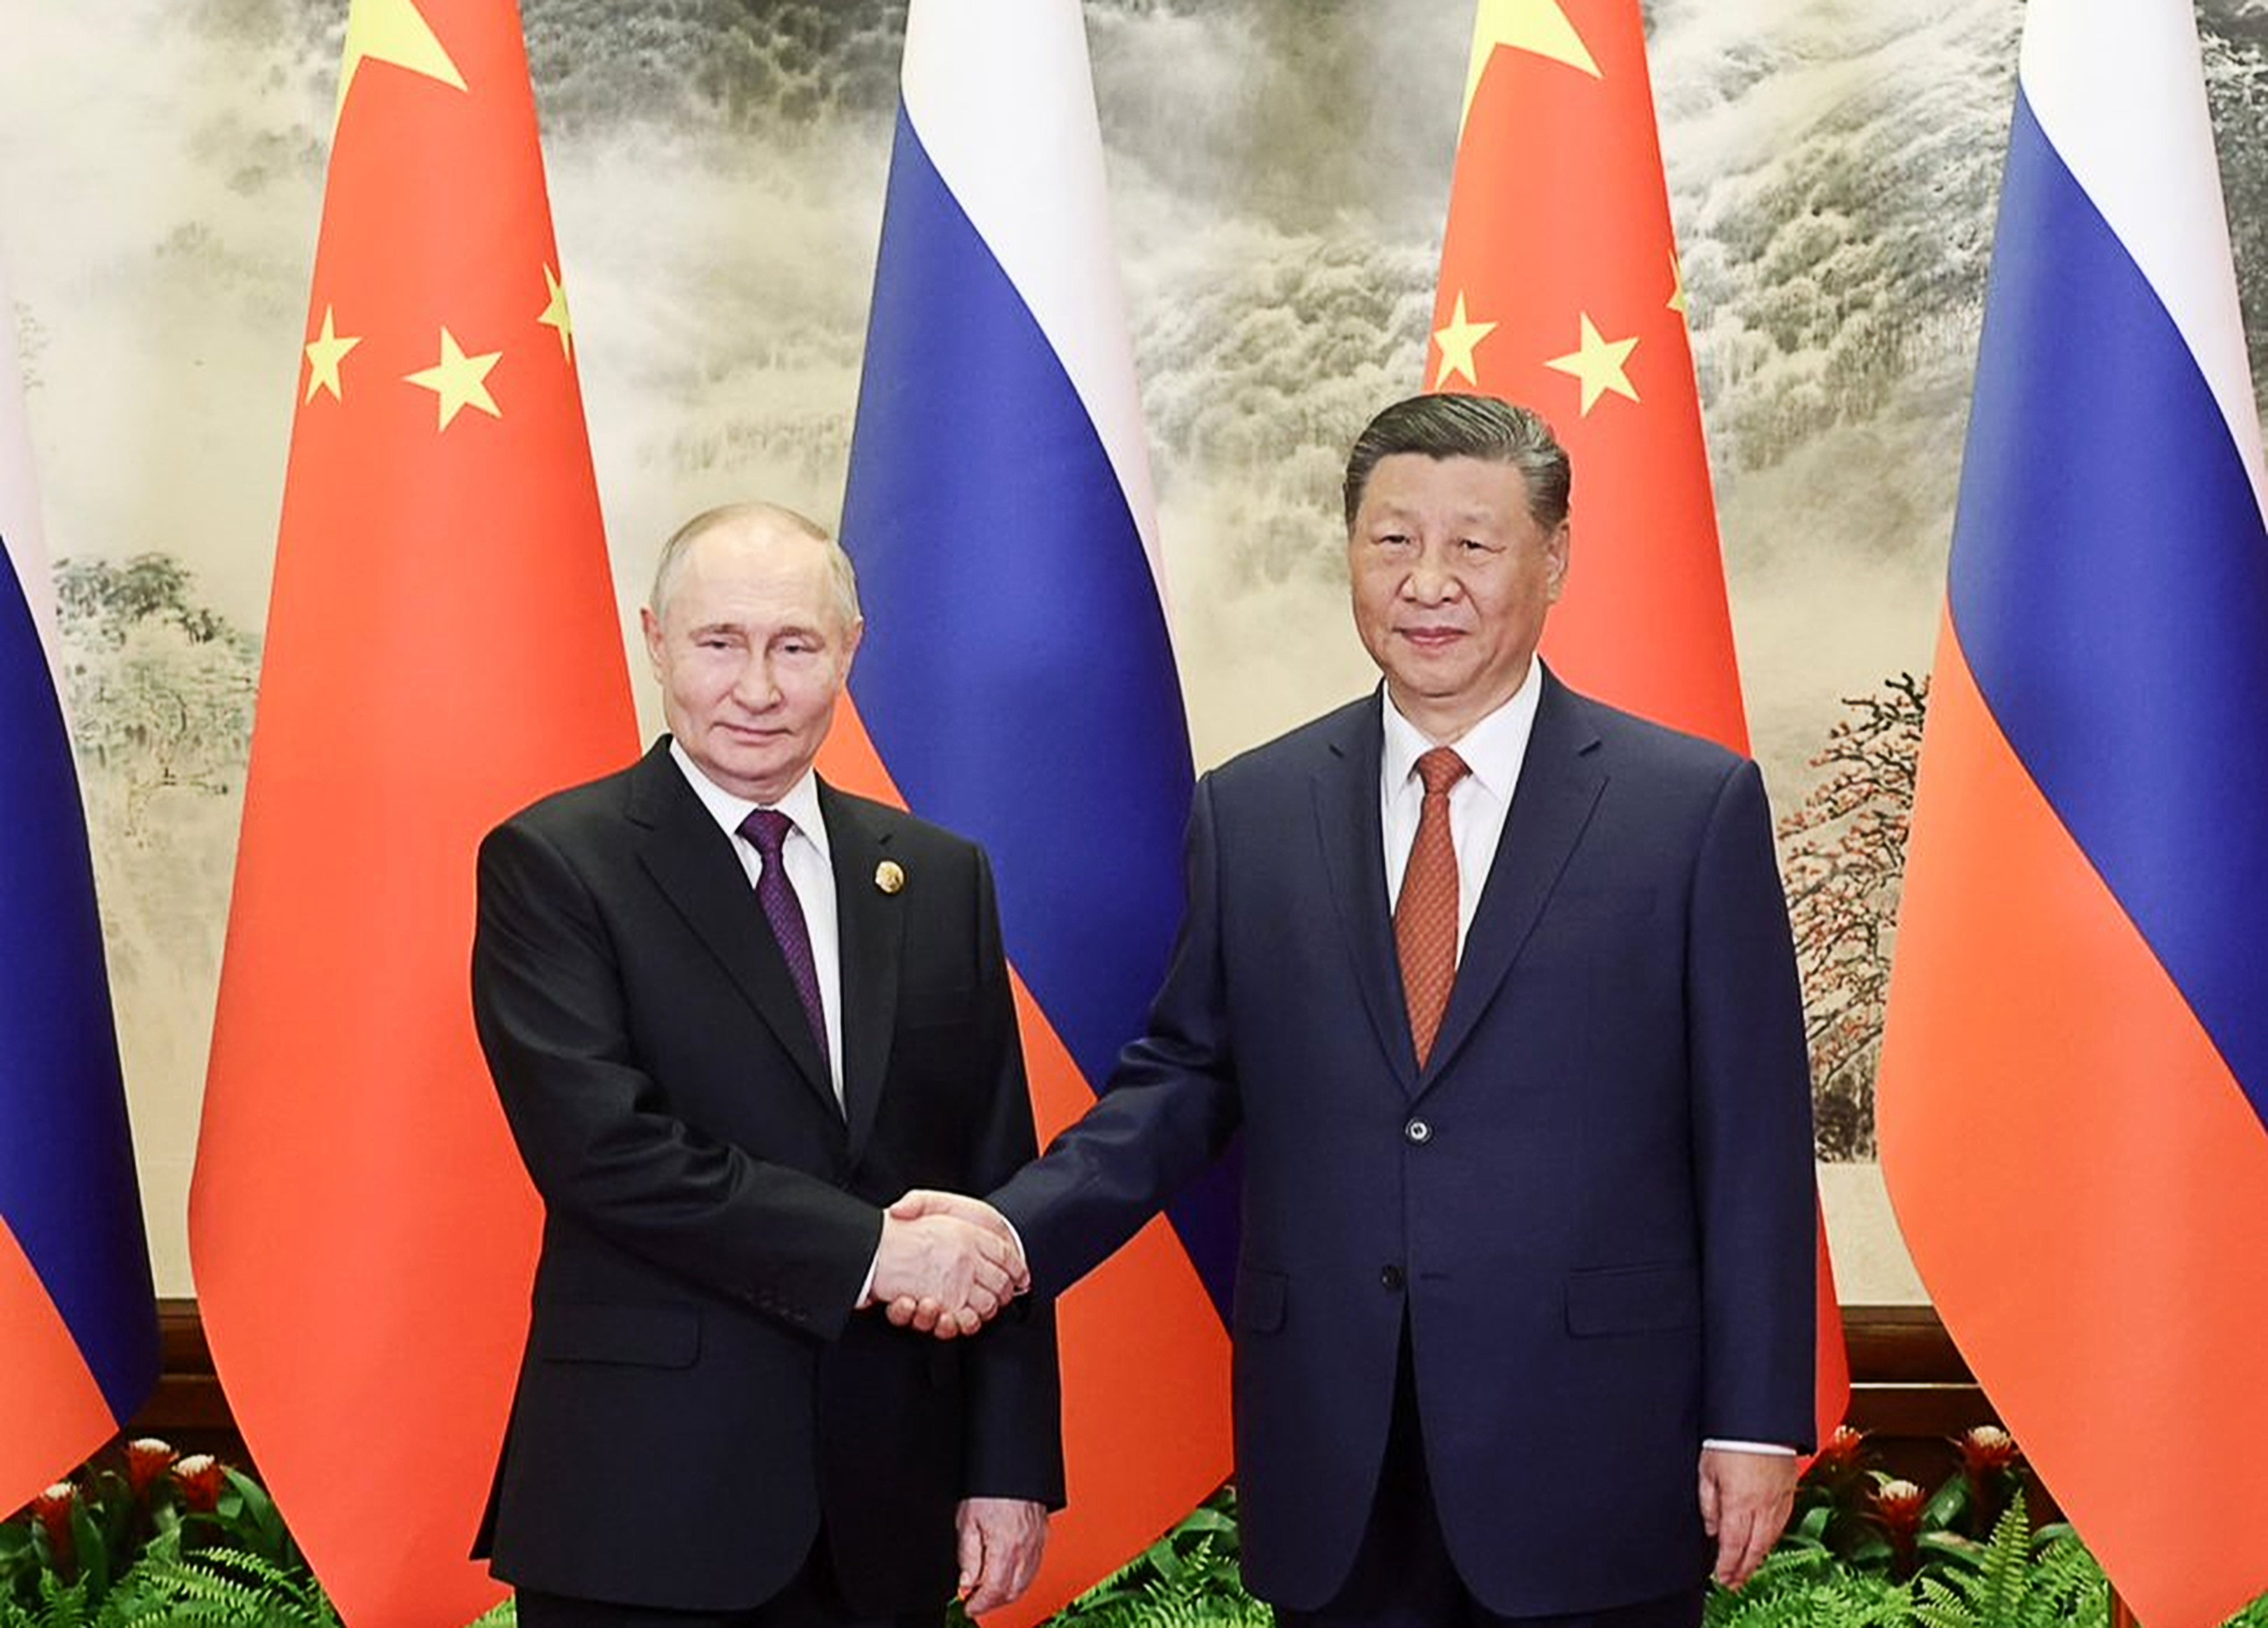 Russian President Vladimir Putin is welcomed to Beijing by China’s leader Xi Jinping. Photo: X/@SpokespersonCHN